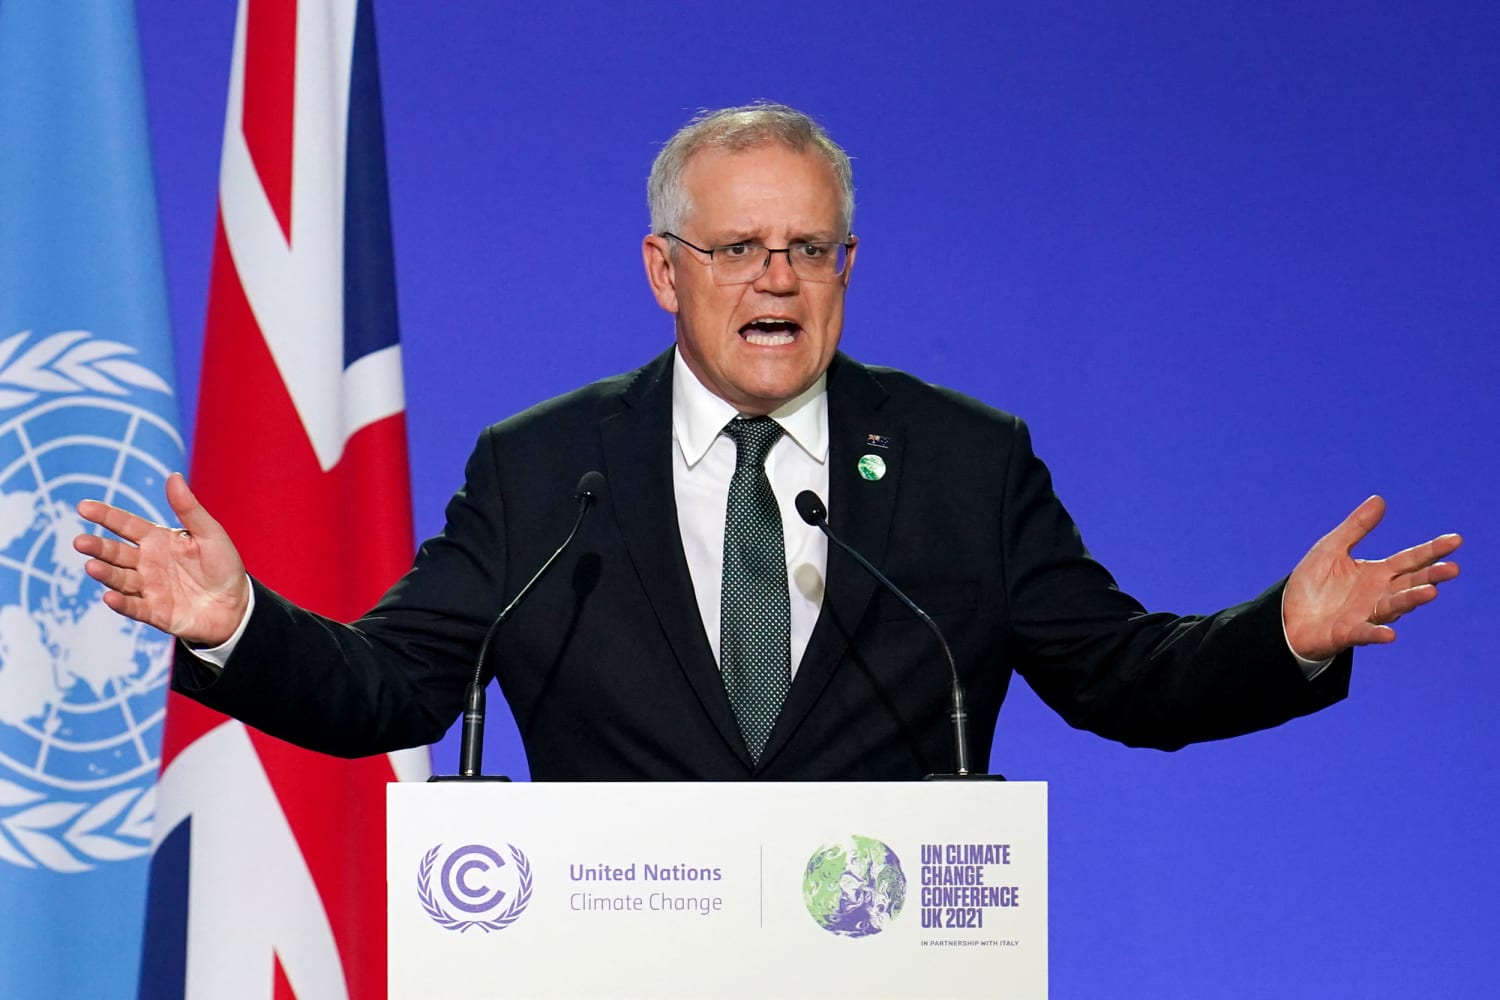 Australia’s dismal climate record comes under spotlight after global summit